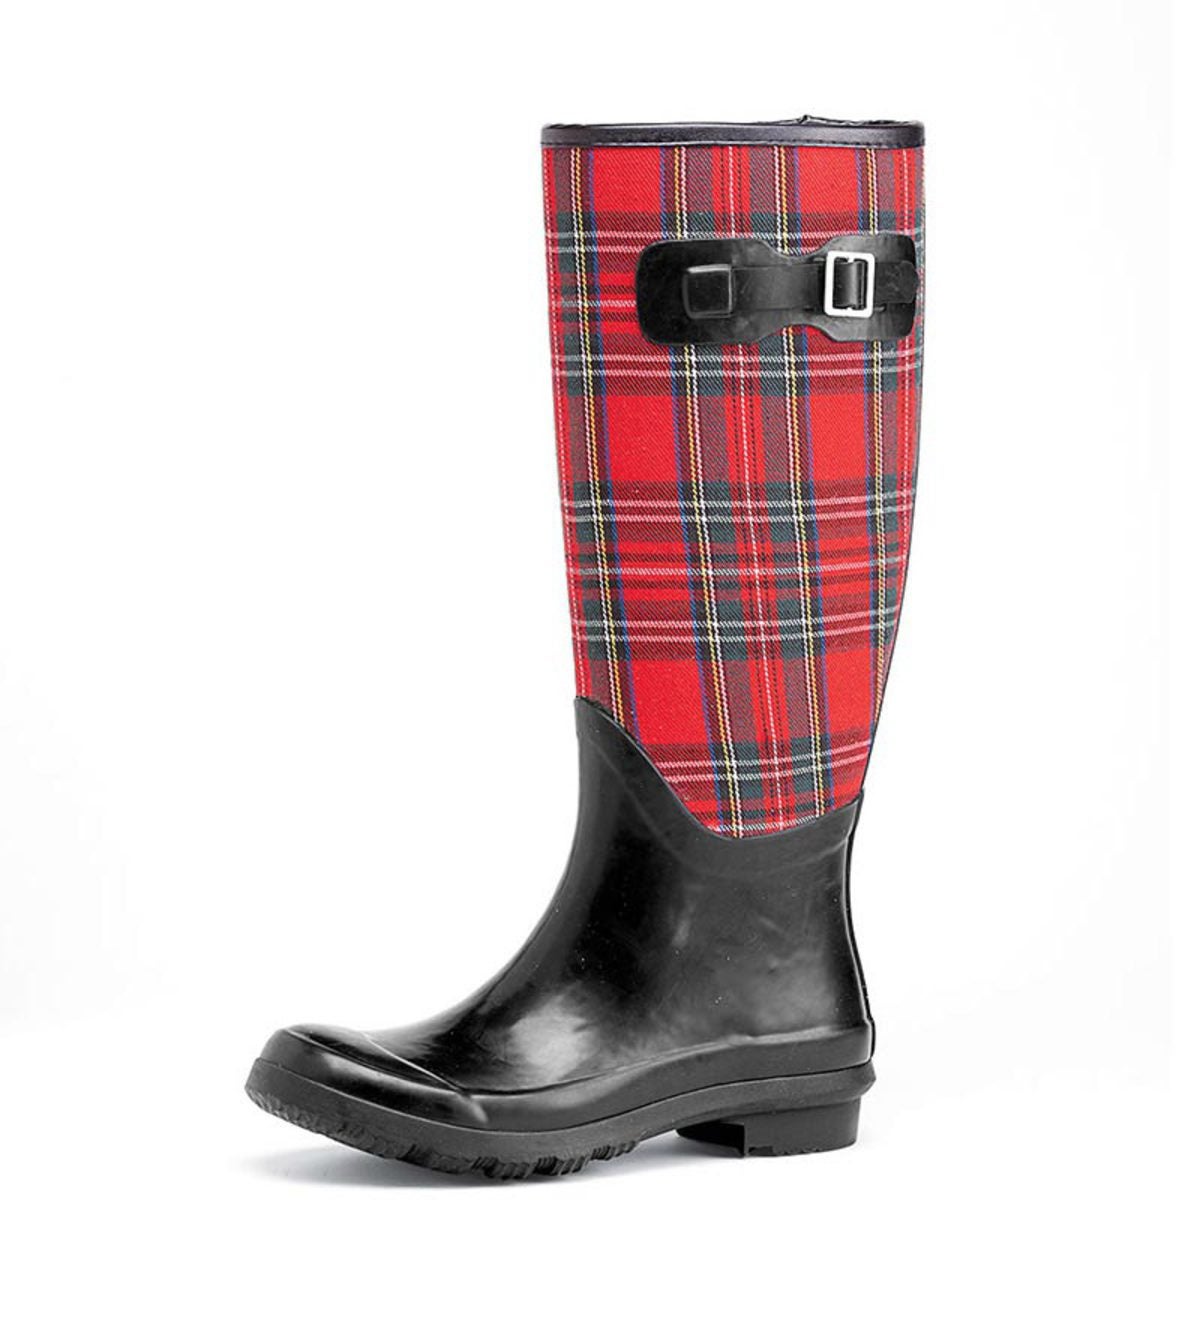 Tall Plaid Waterproof Rubber Garden Boots With Buckle Detail | PlowHearth